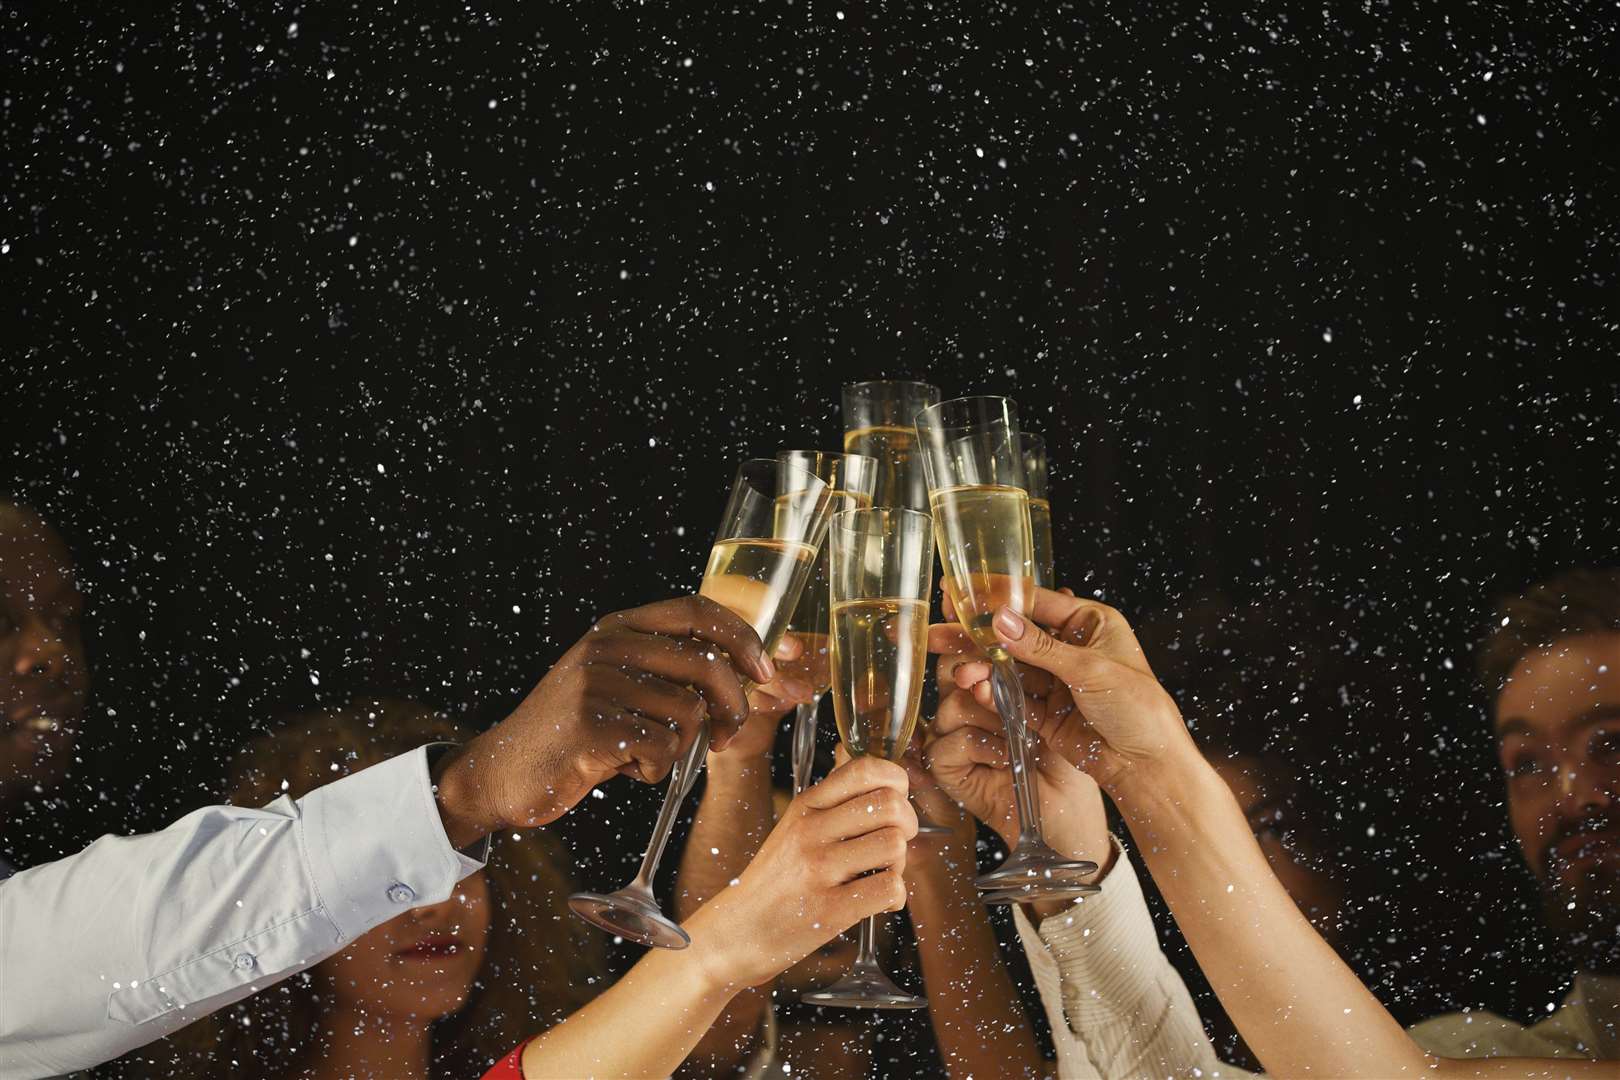 Will you be celebrating with colleagues this Christmas?